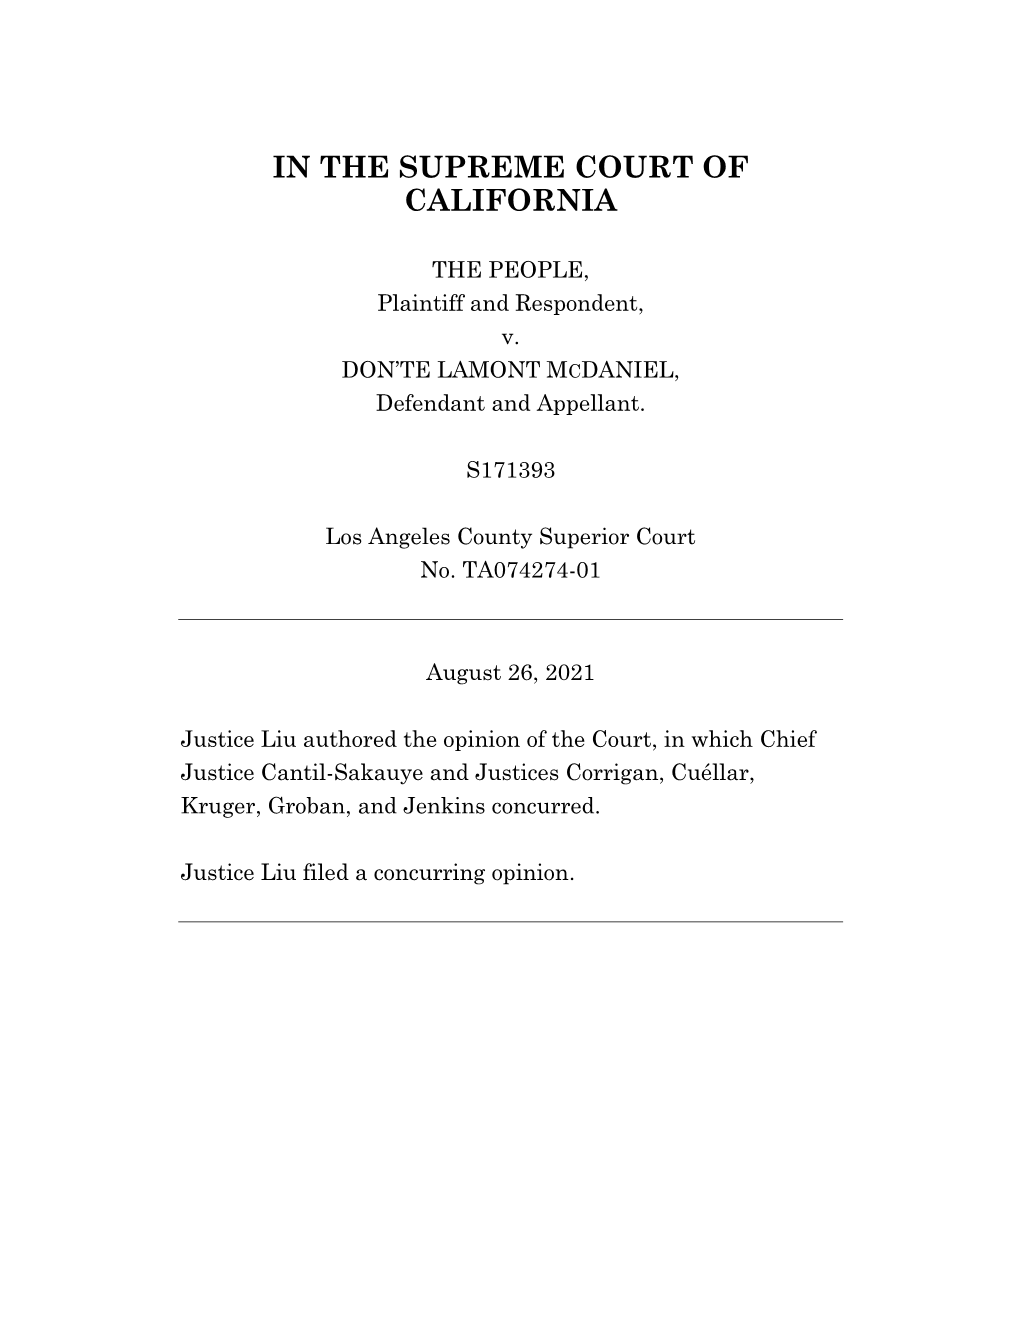 Opinion of the Court, in Which Chief Justice Cantil-Sakauye and Justices Corrigan, Cuéllar, Kruger, Groban, and Jenkins Concurred